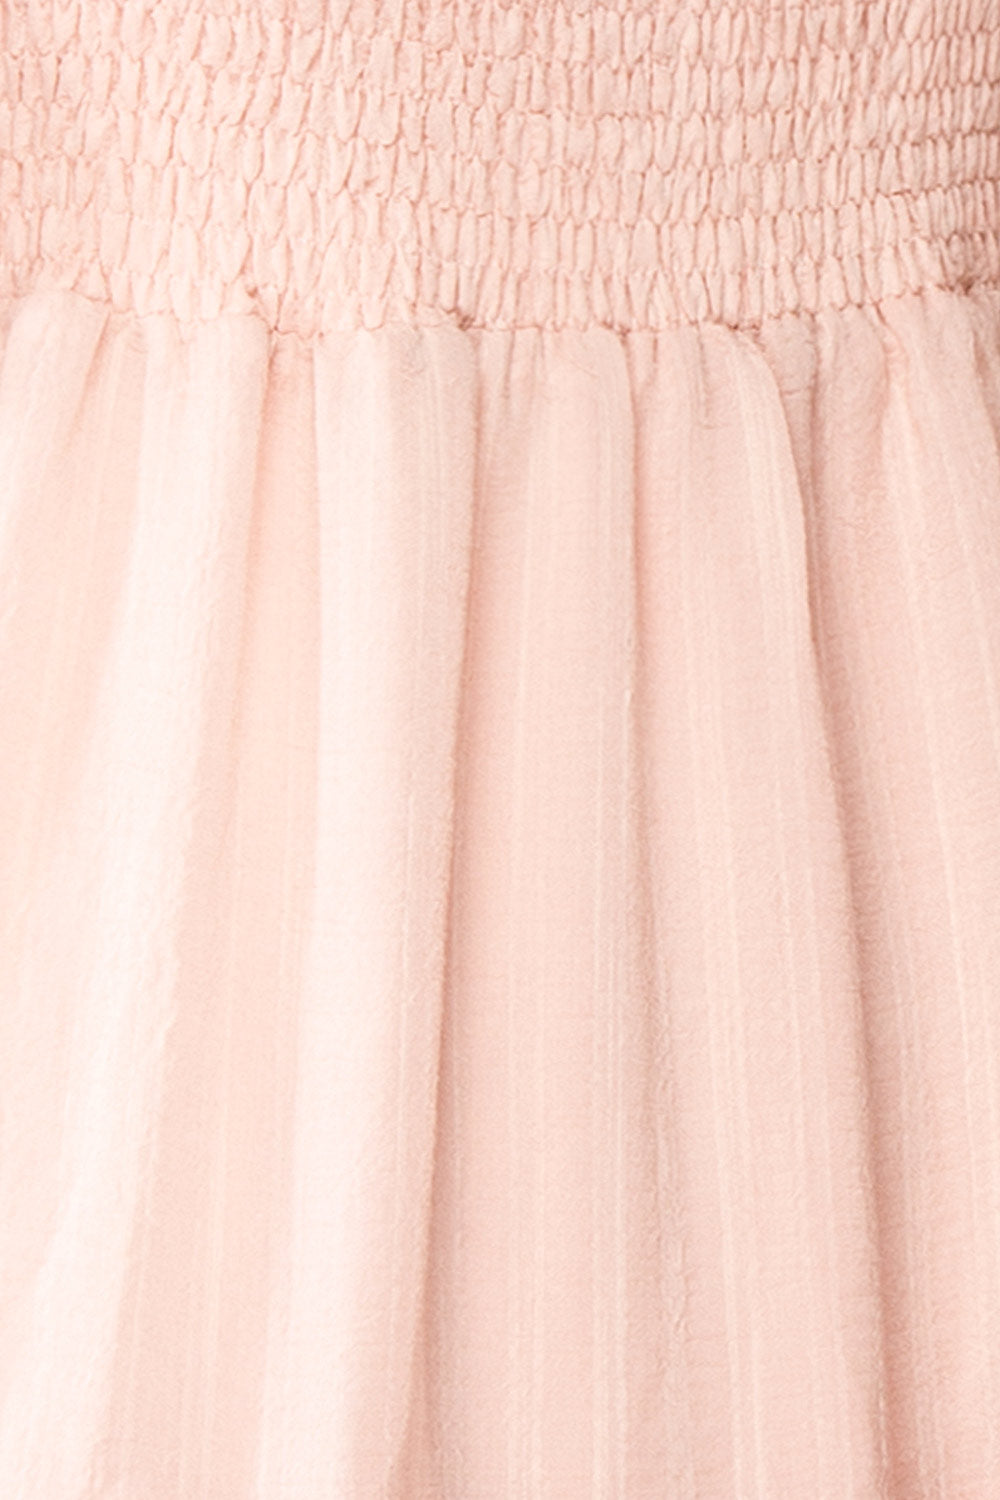 Abra PInk Tiered Midi Dress w/ Puffy Sleeves | Boutique 1861 fabric 